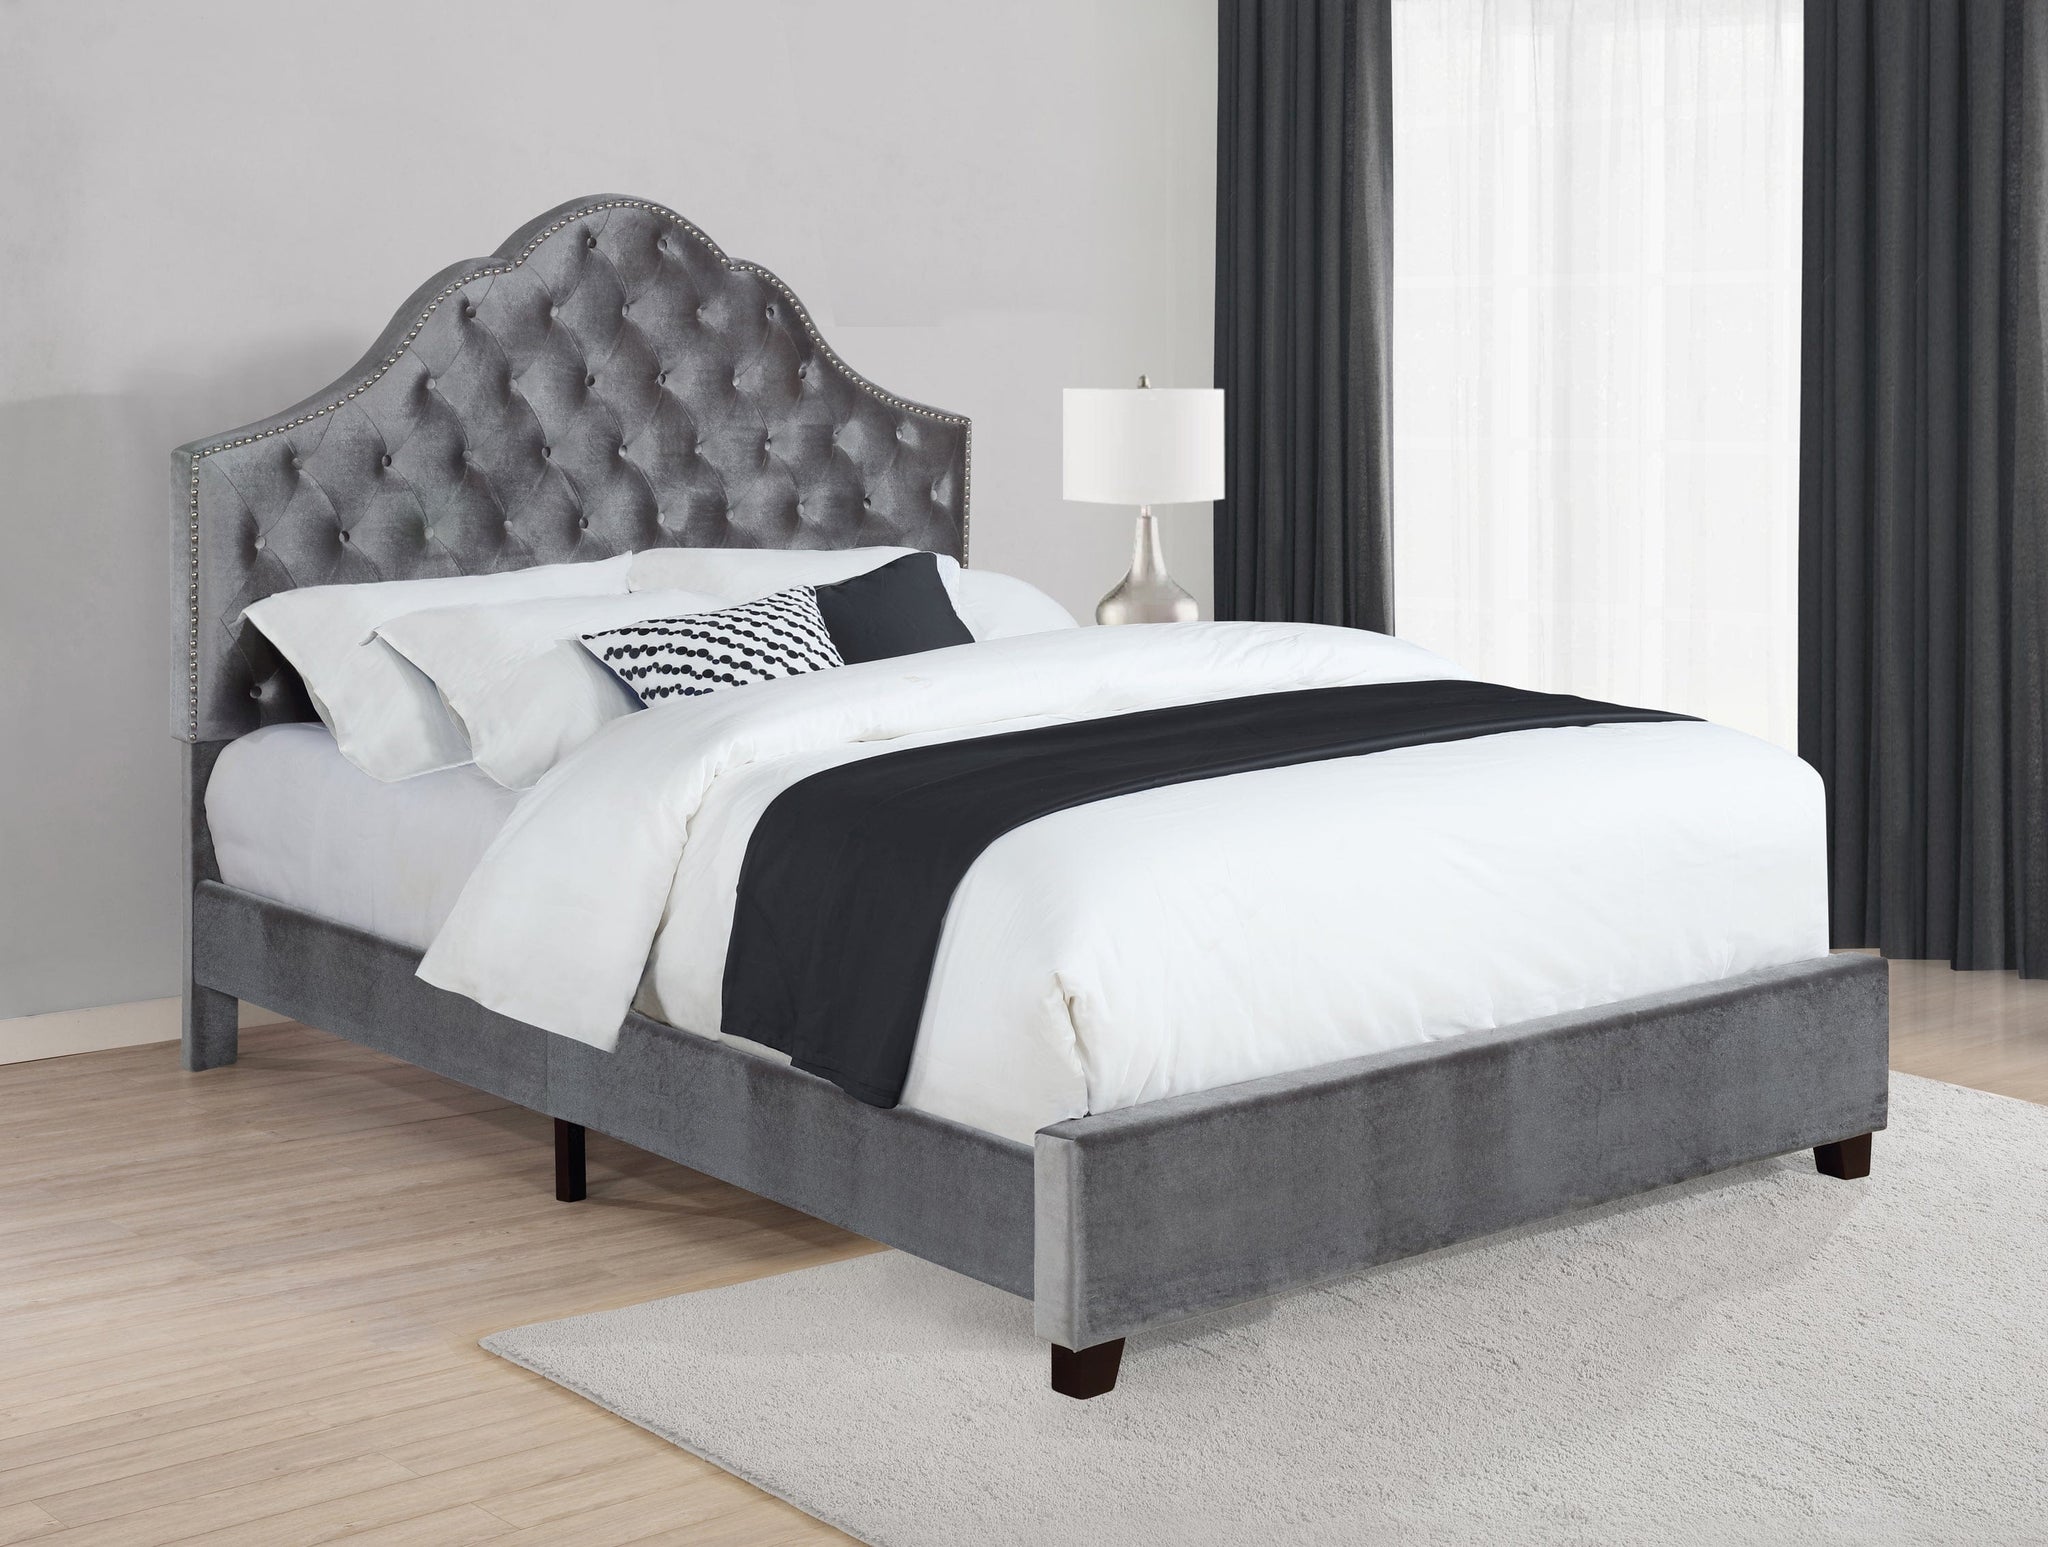 Abbeville Eastern King Upholstered Bed With Arched Headboard Grey - 315891KE